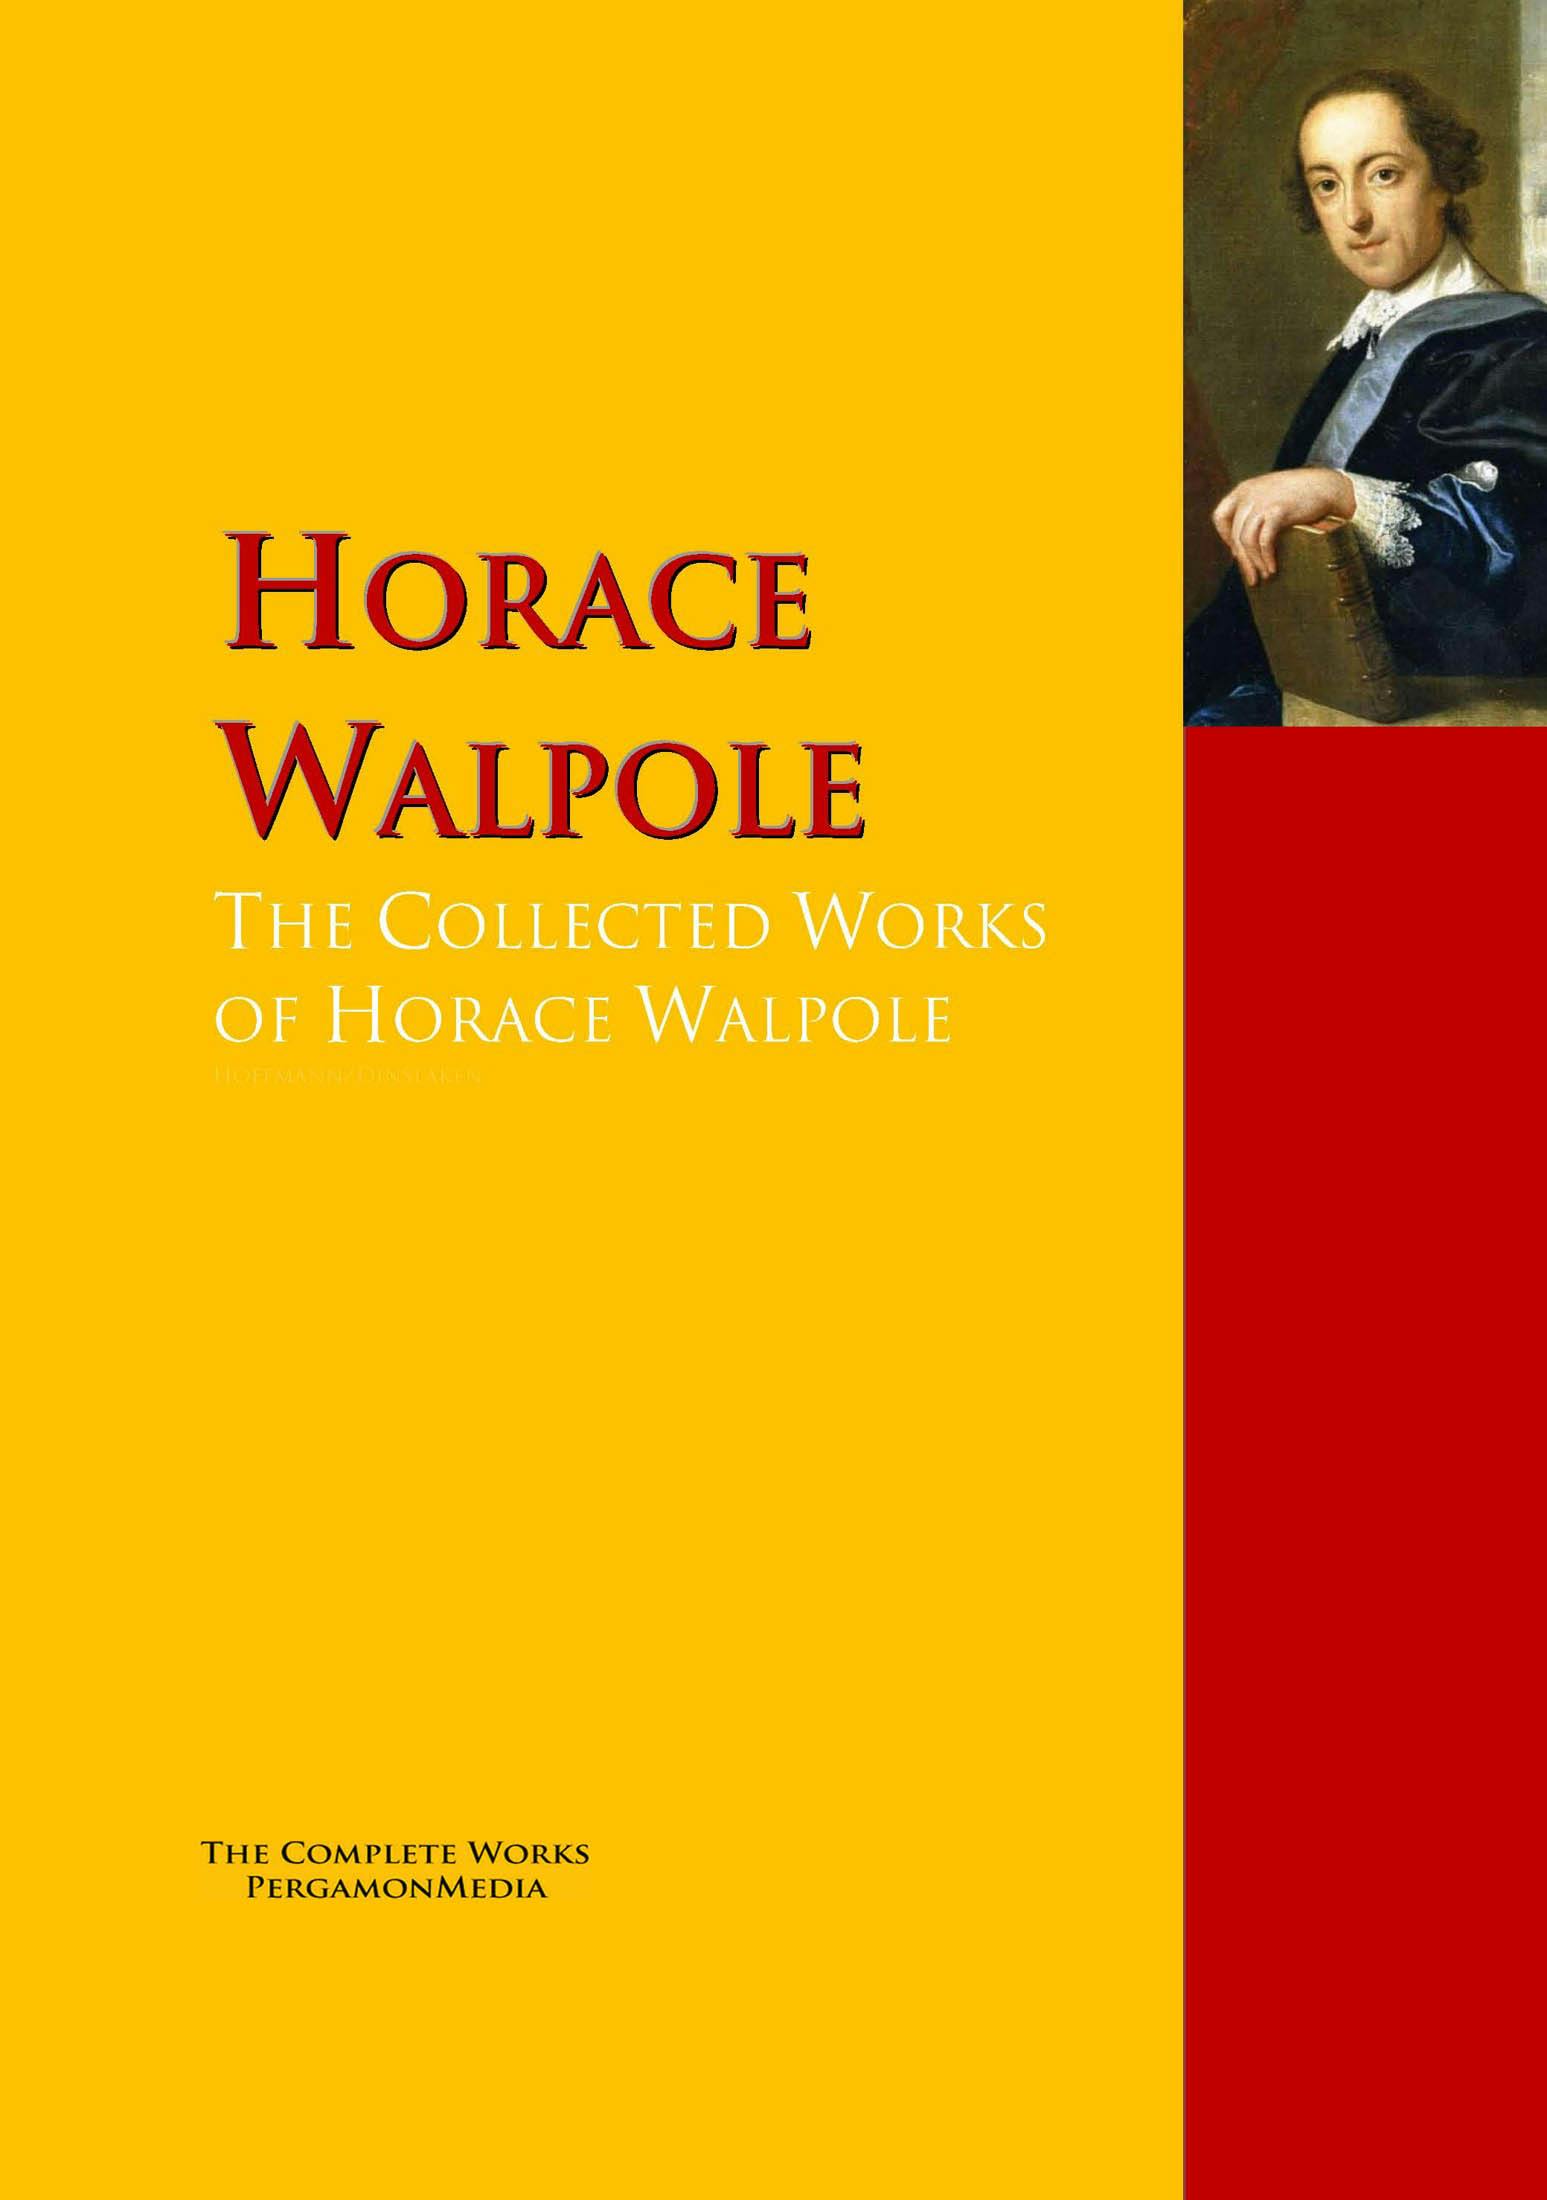 The Collected Works of Horace Walpole - Horace Walpole